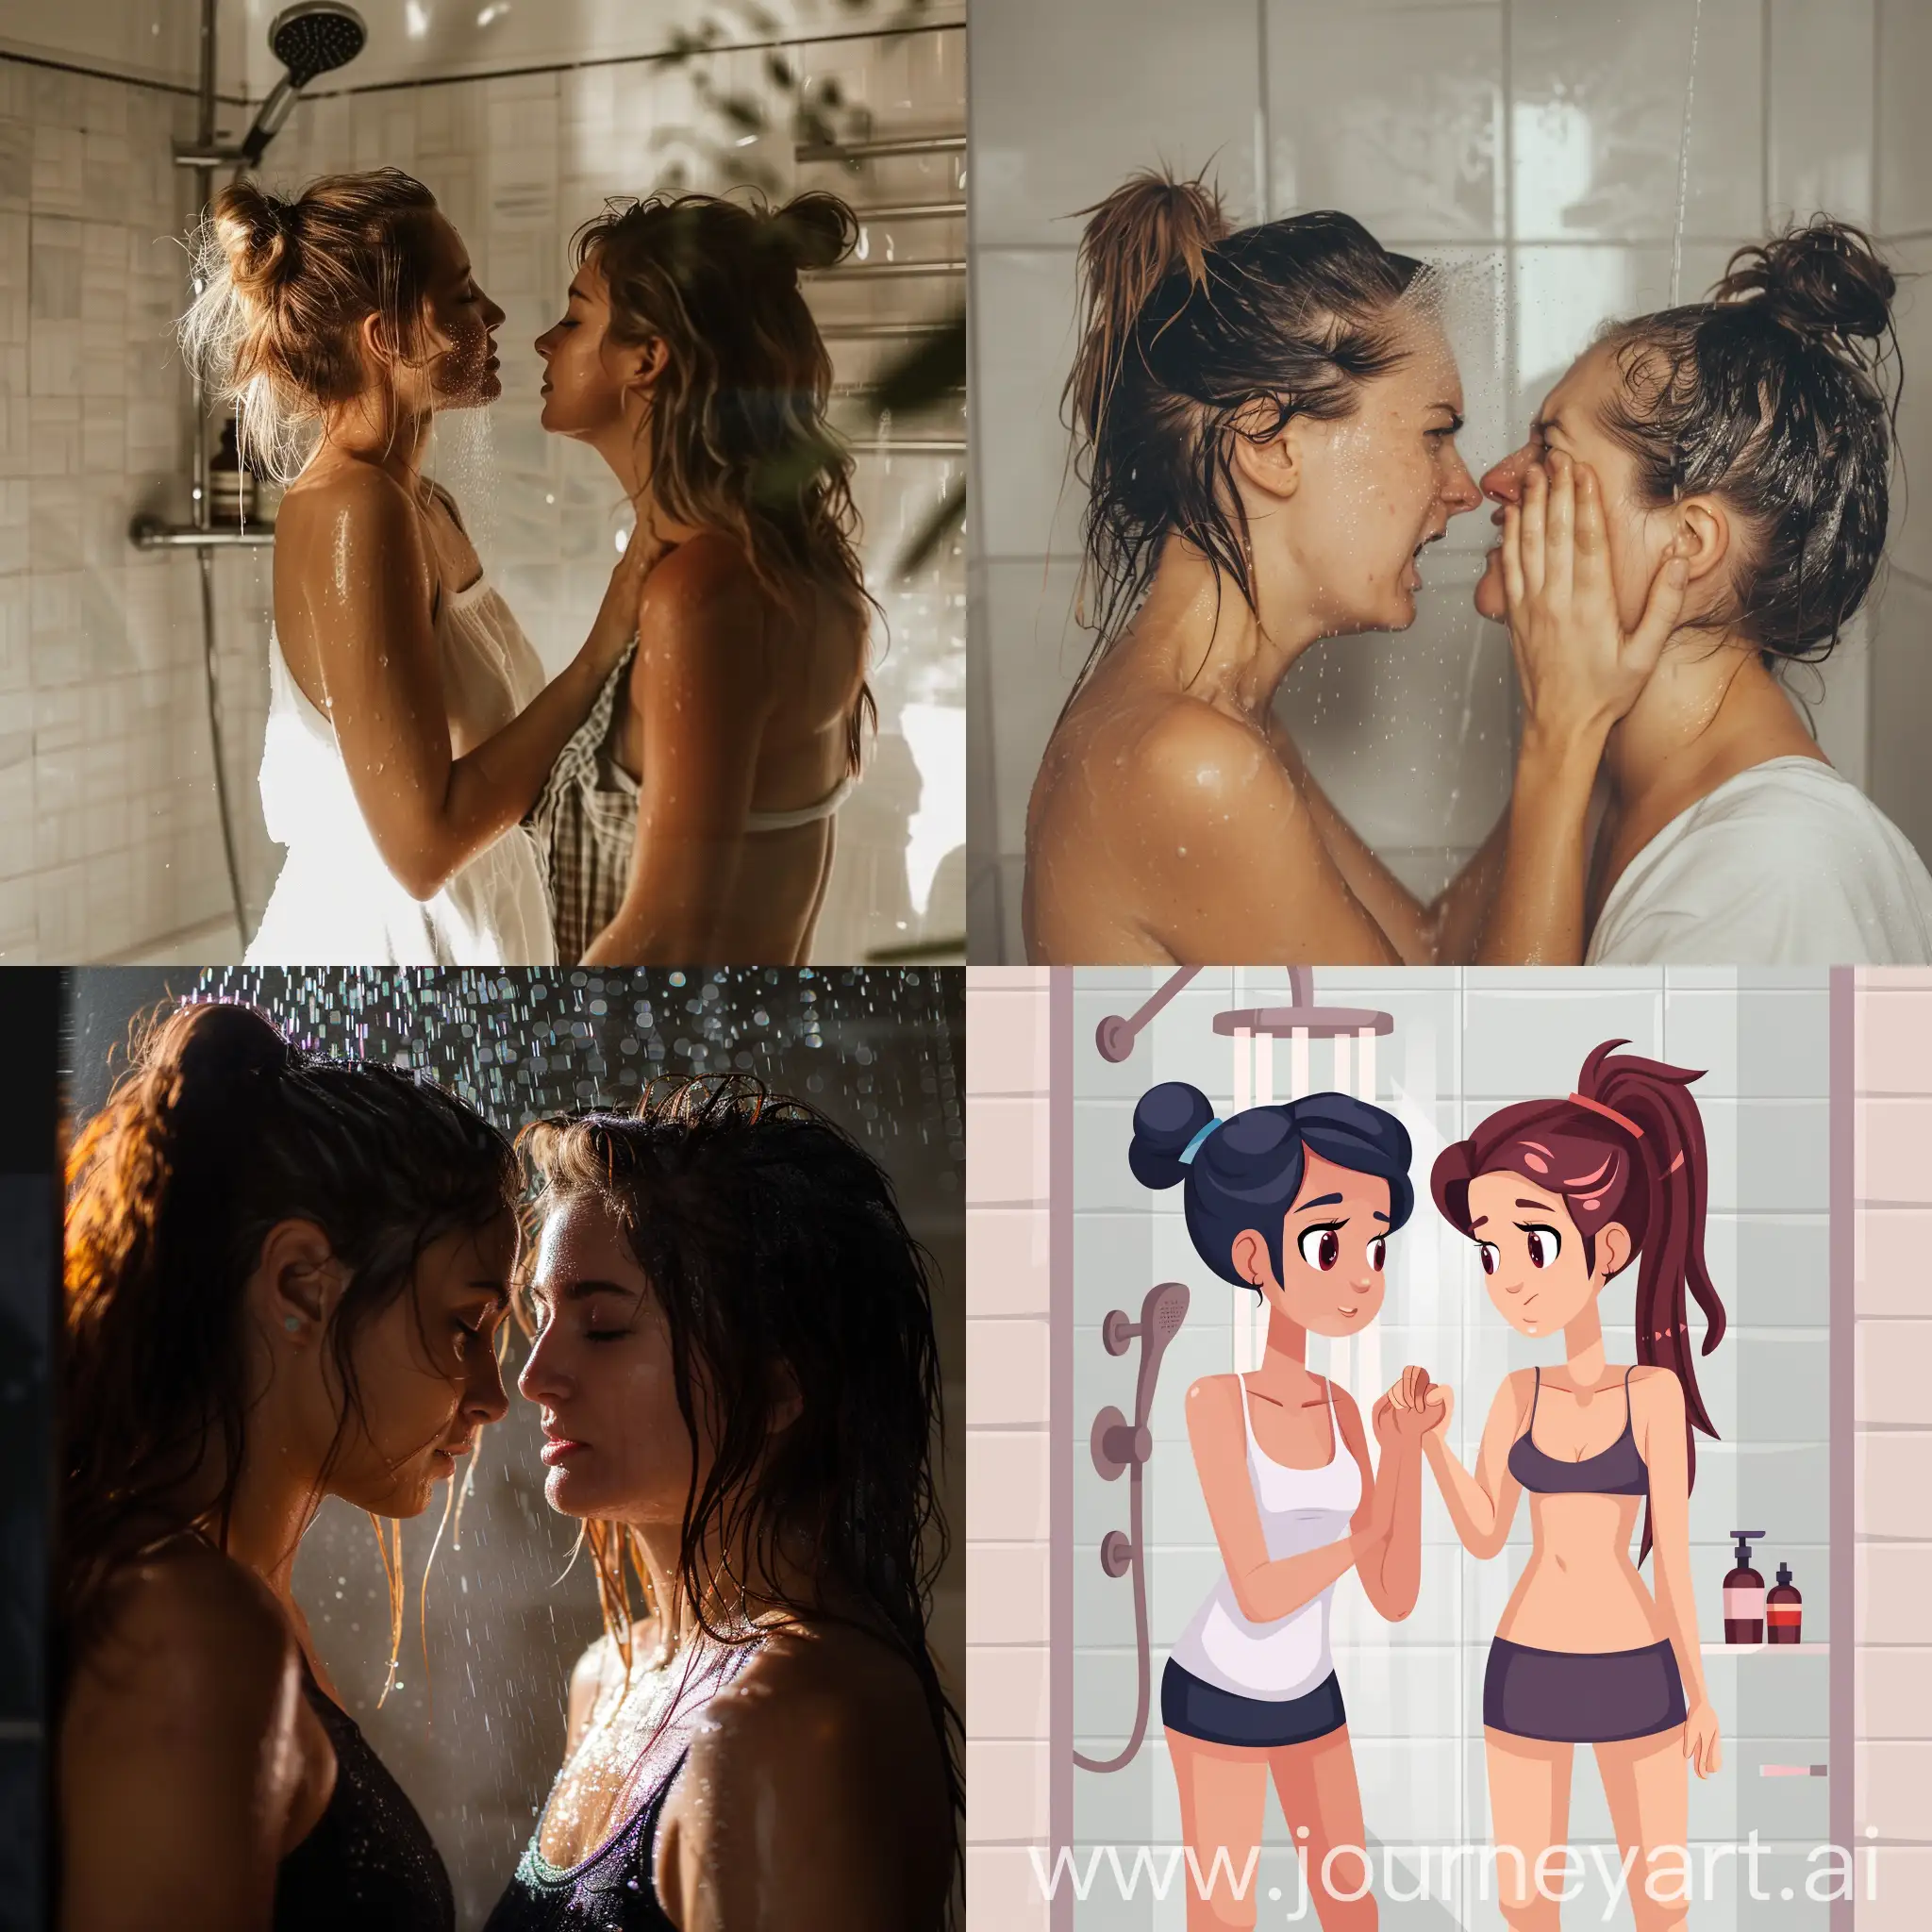 Reserved-Woman-Avoids-Physical-Contact-with-Girlfriend-PostShower